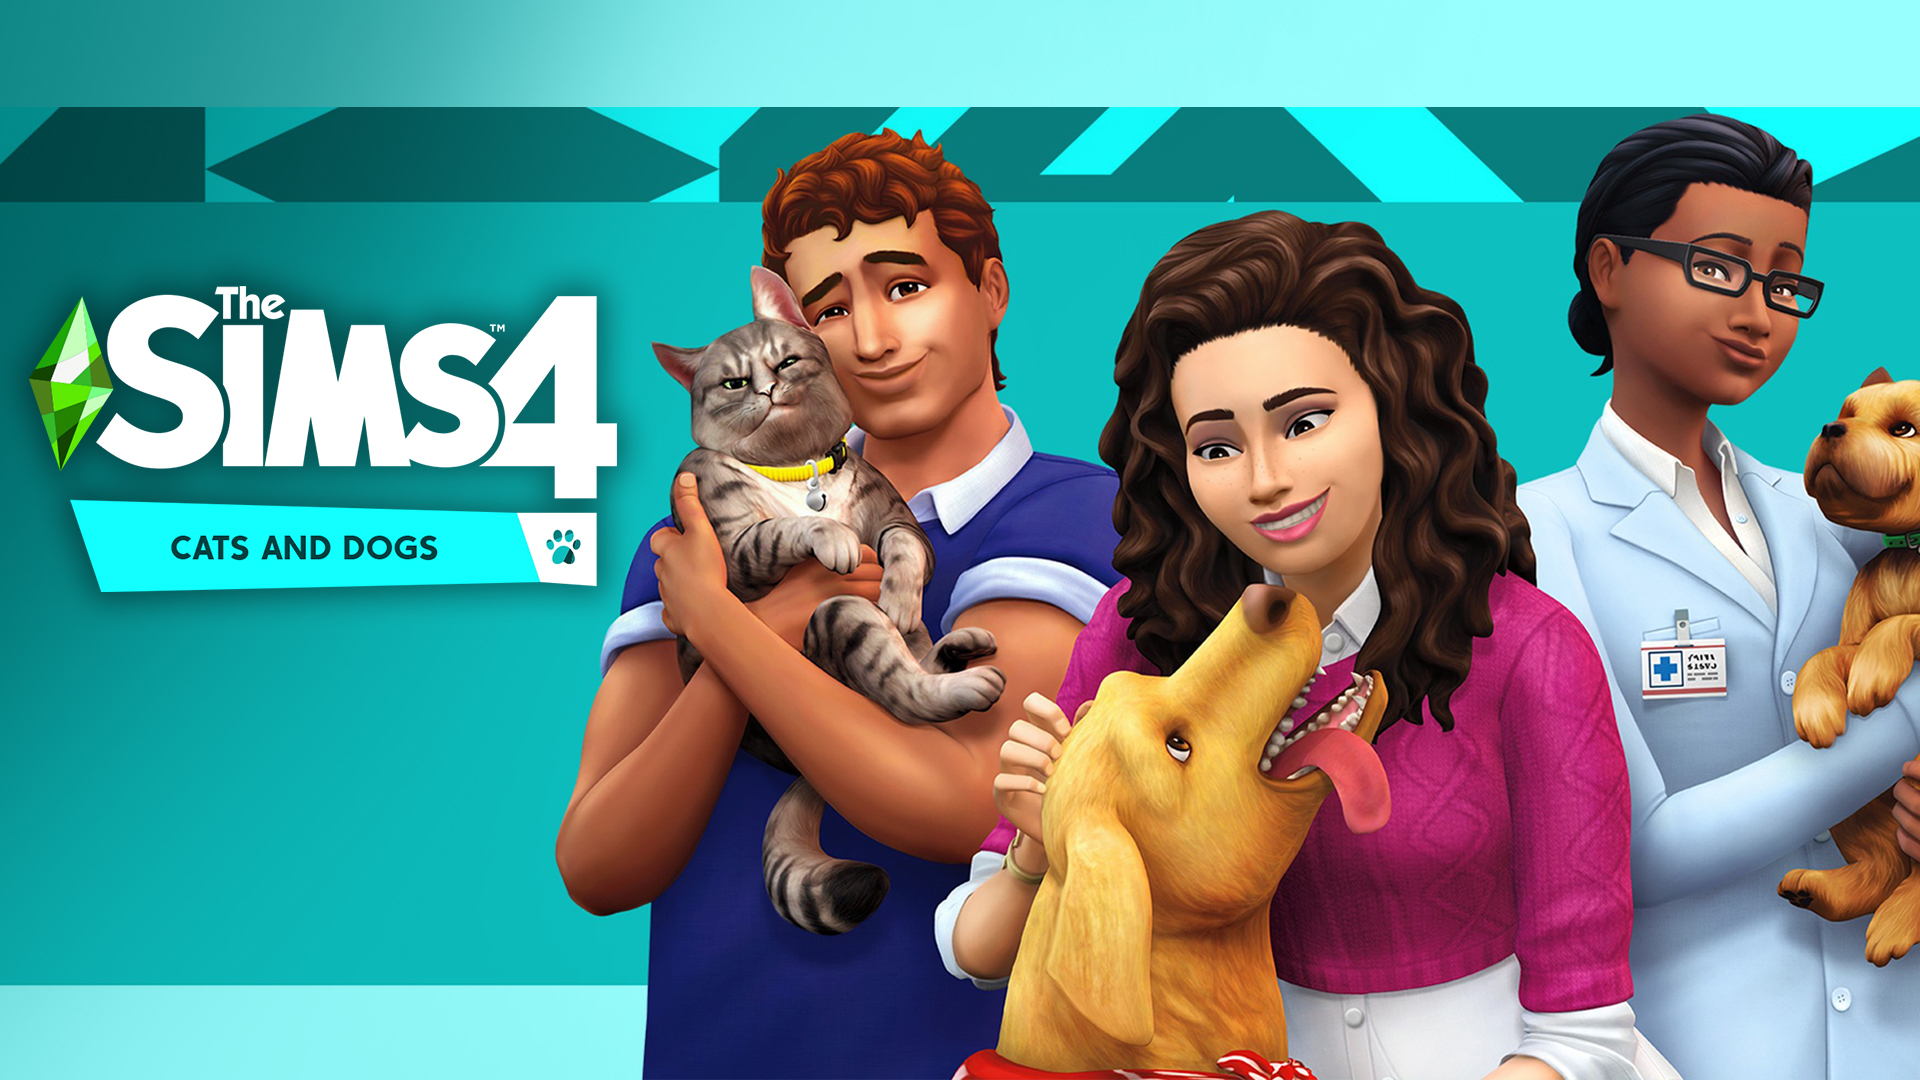 the sims 4 cats and dogs cracked run origin?